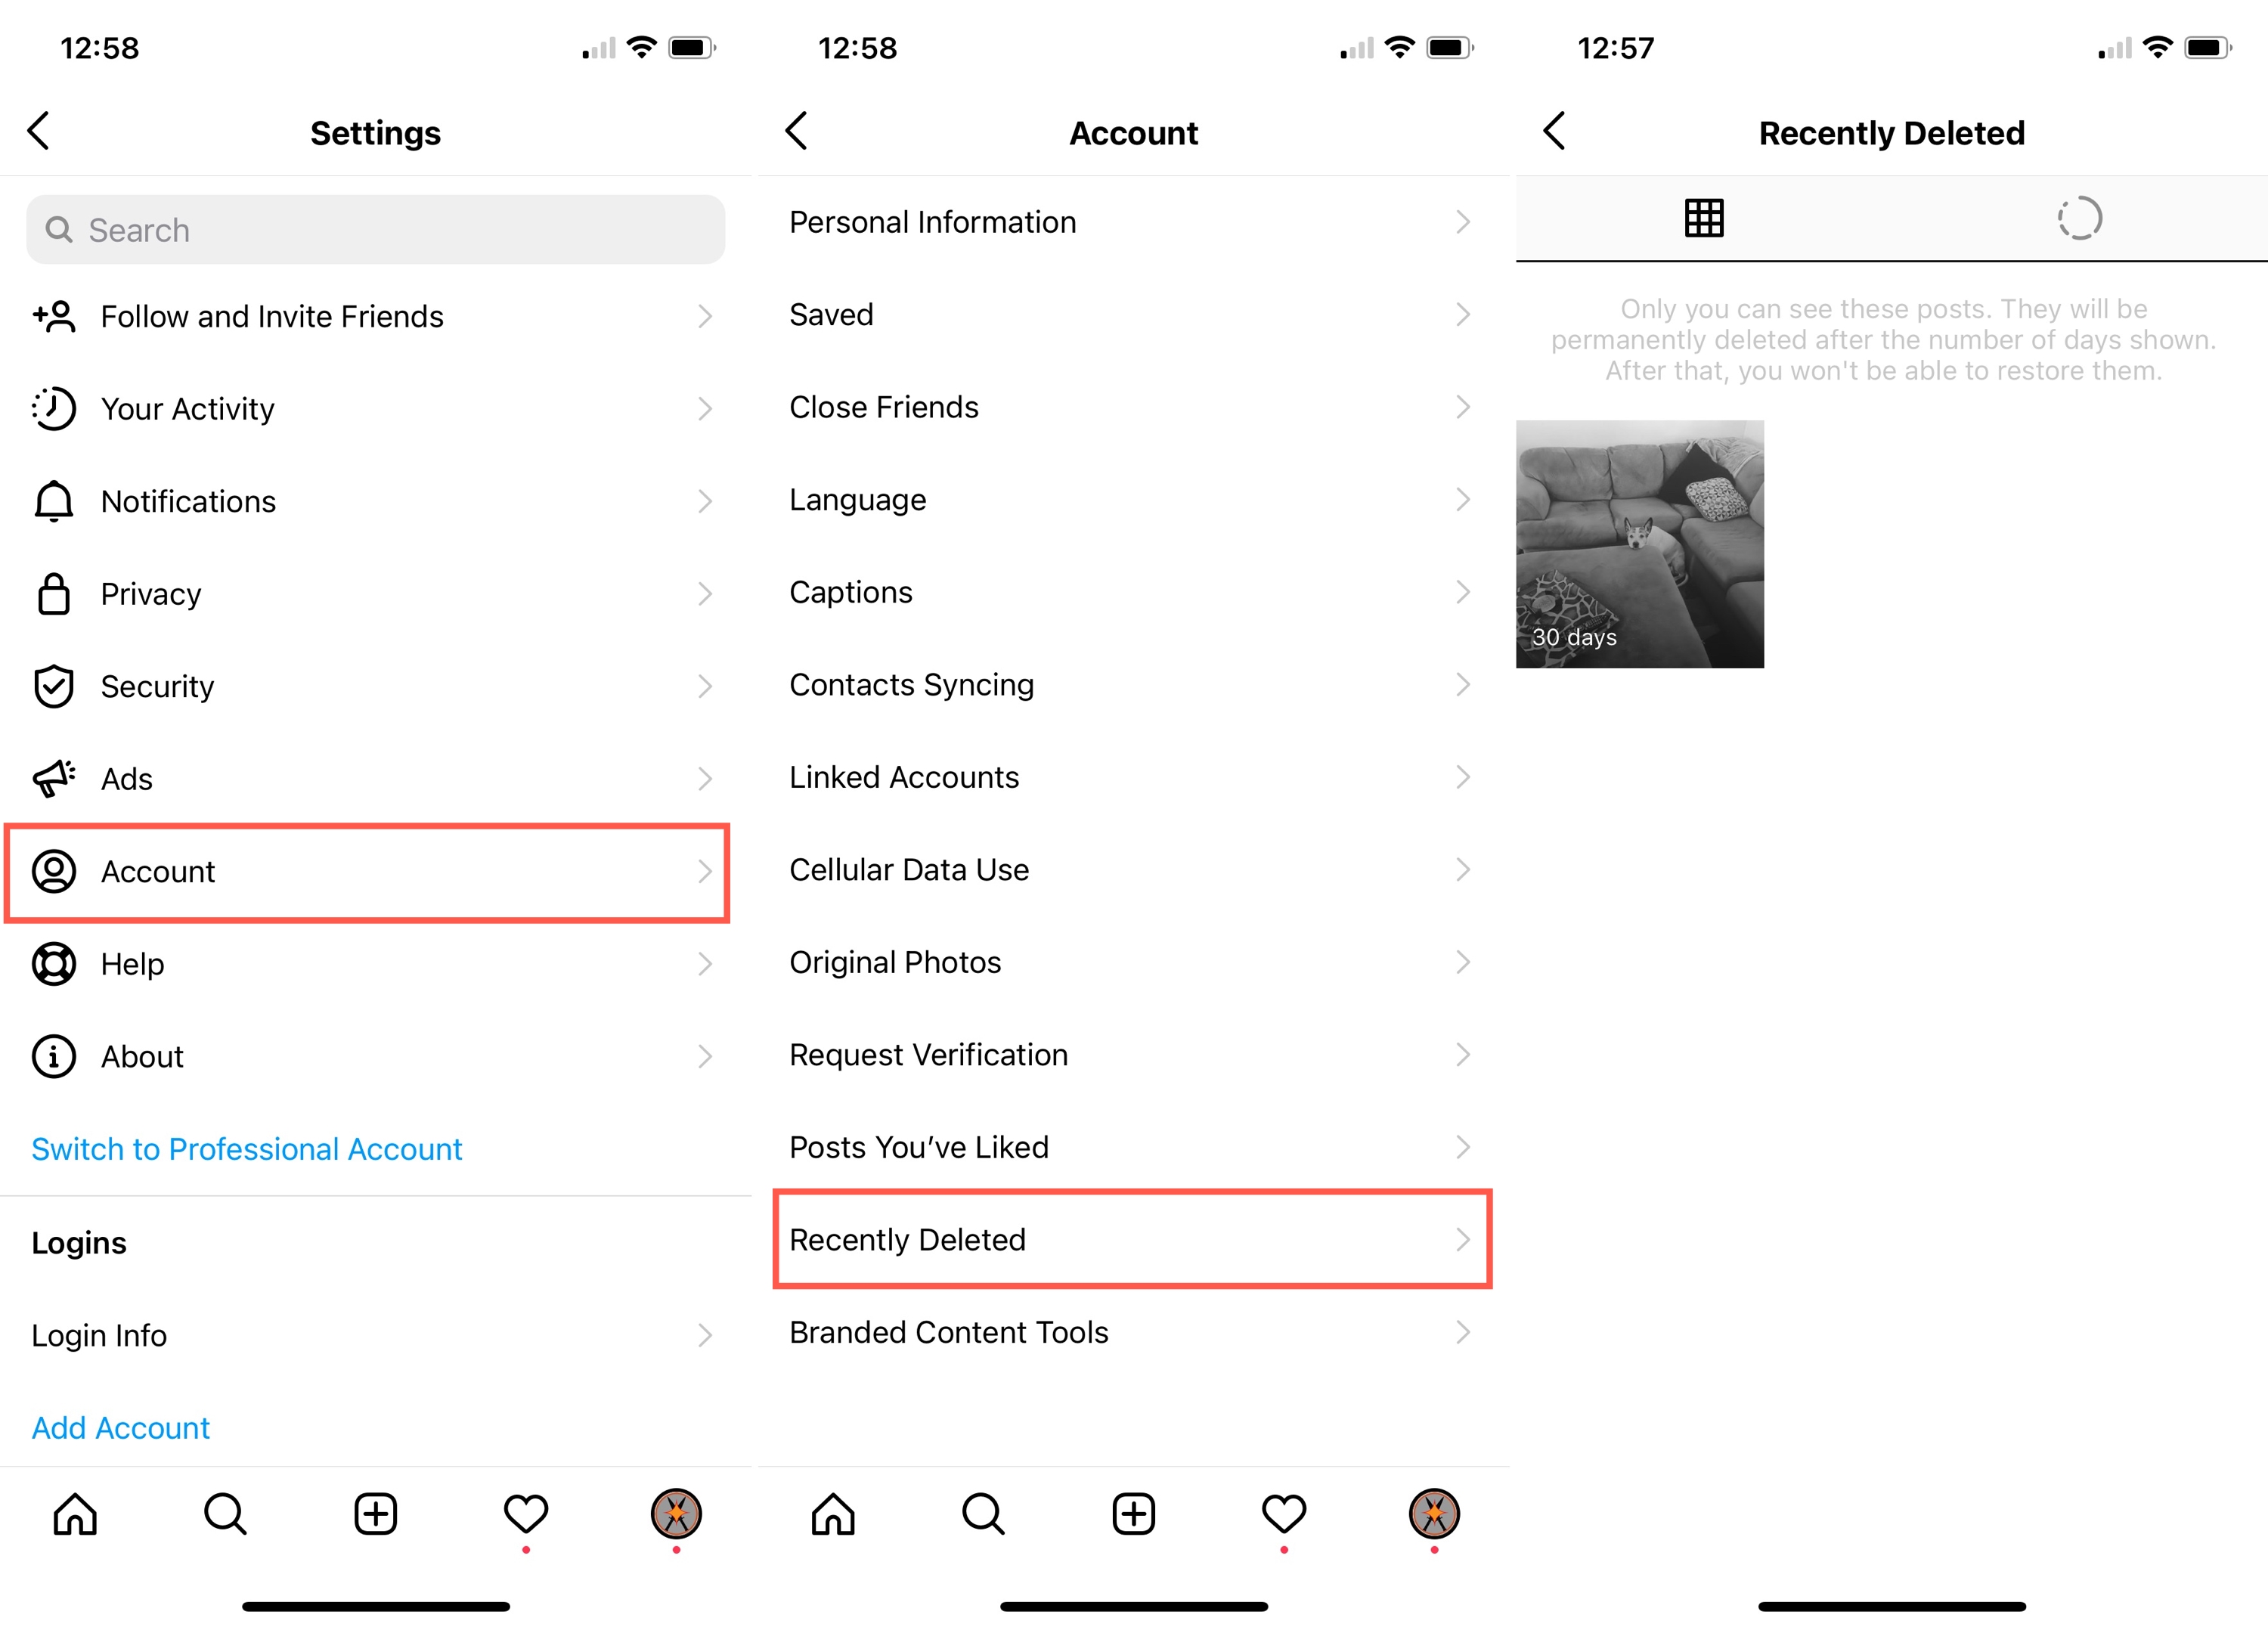 A screenshot of the Instagram app with the 'Recently Deleted' option highlighted, which can be used to view deleted Instagram stories.